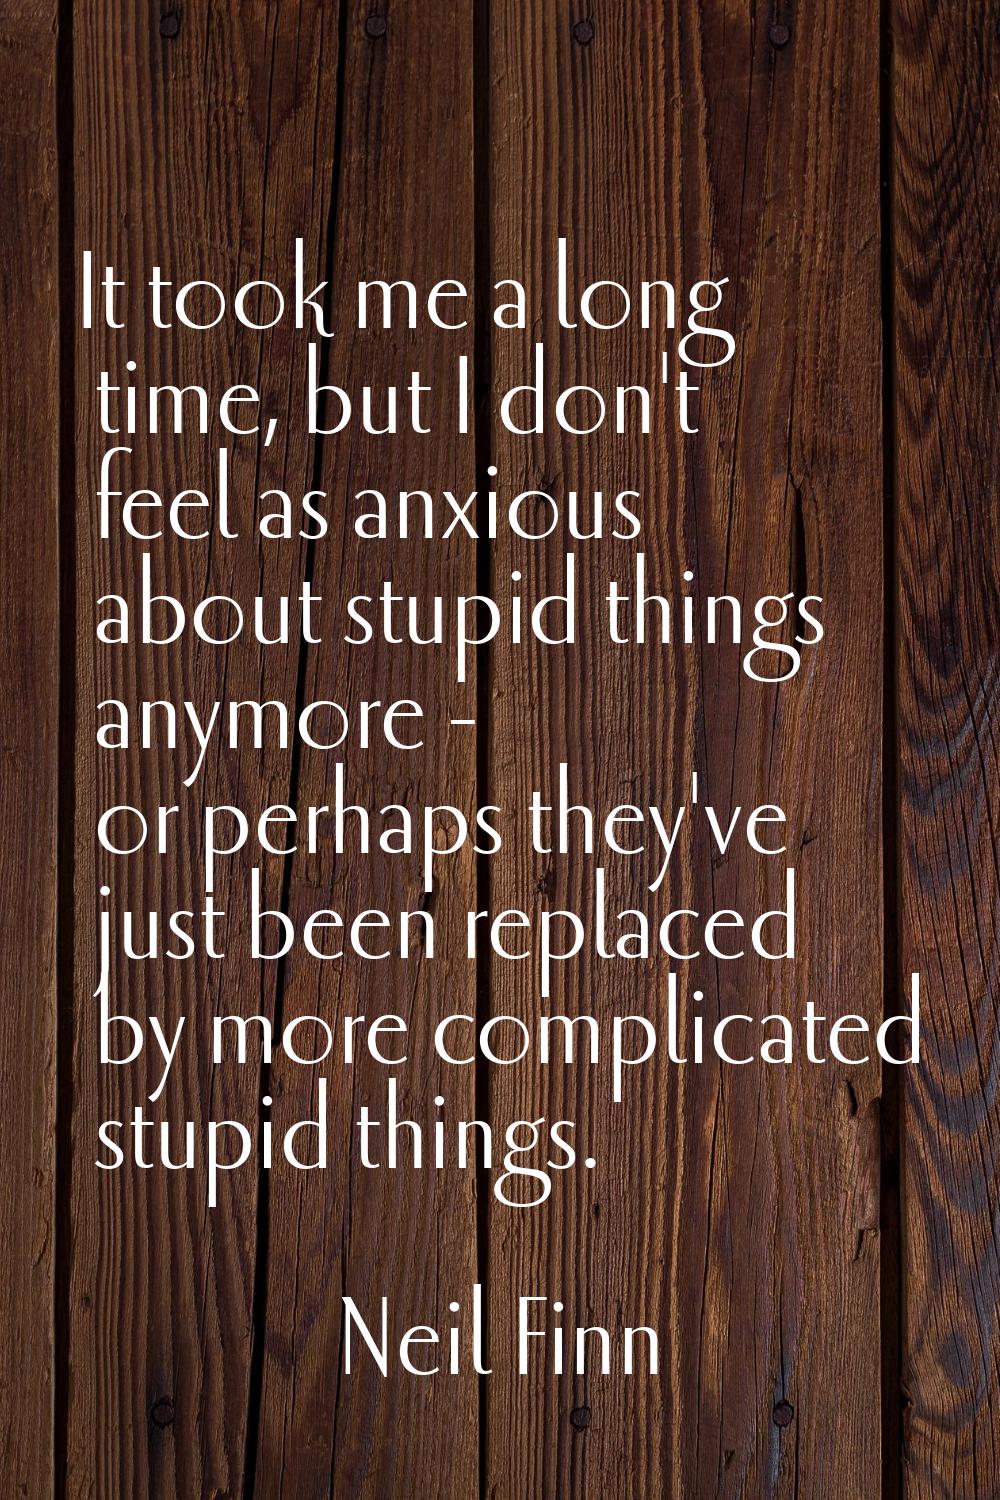 It took me a long time, but I don't feel as anxious about stupid things anymore - or perhaps they'v